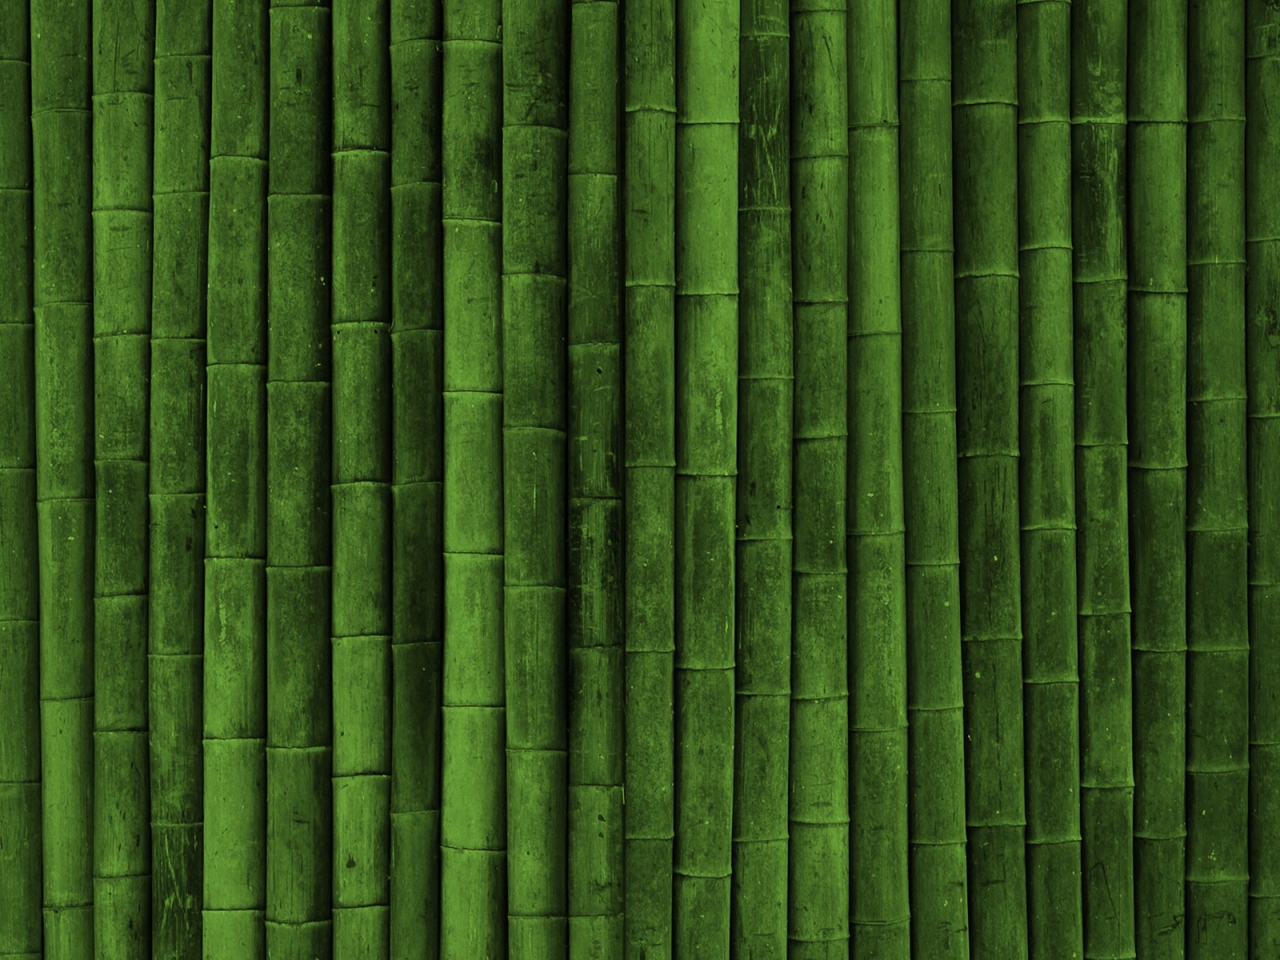 Bamboo for 1280 x 960 resolution